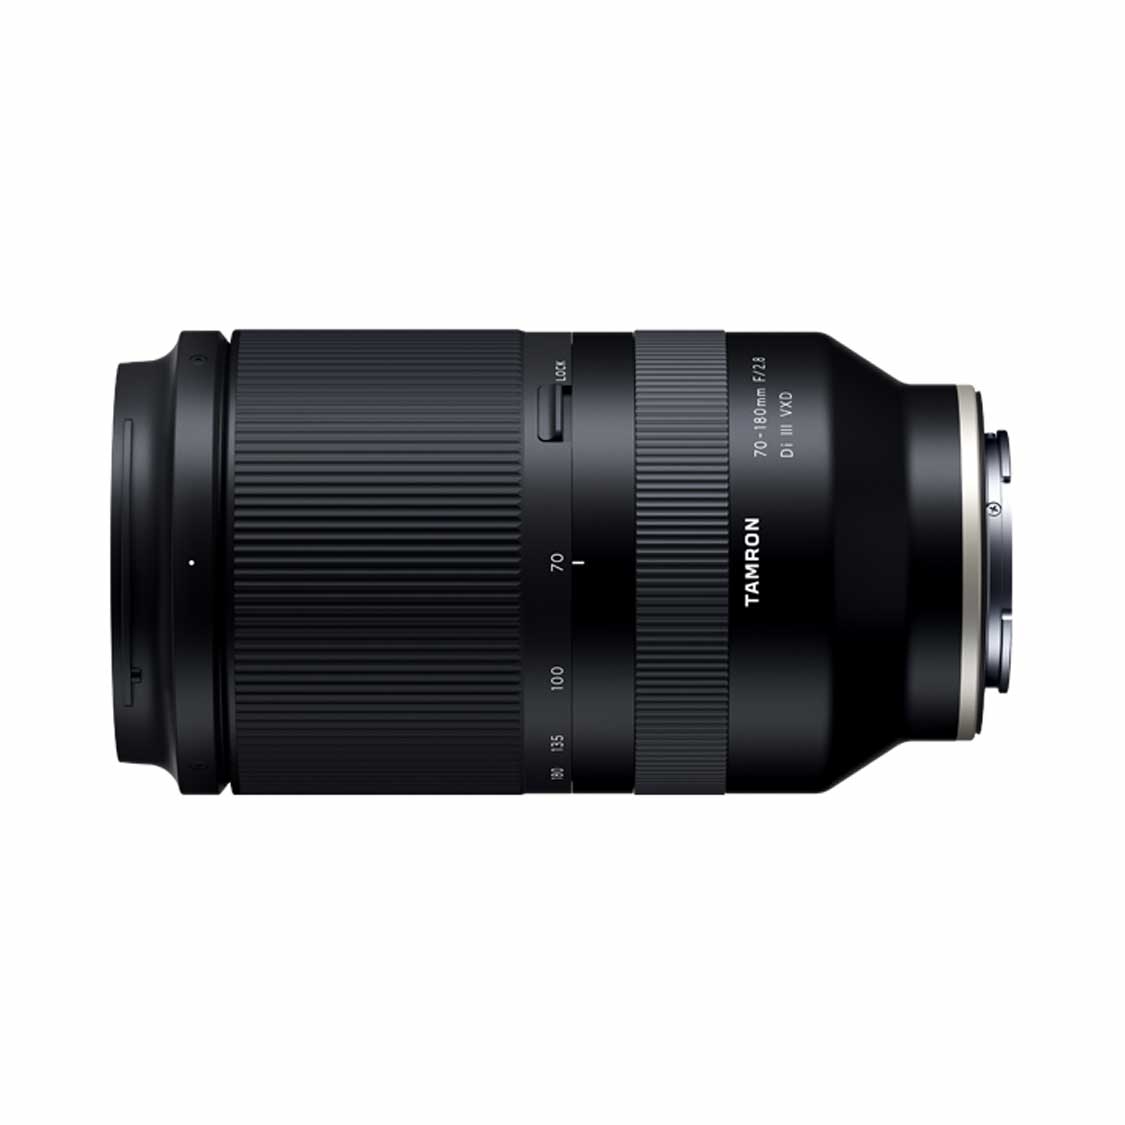 Tamron 70-180mm f2.8 DI III VXD Lens for Sony E-Mount